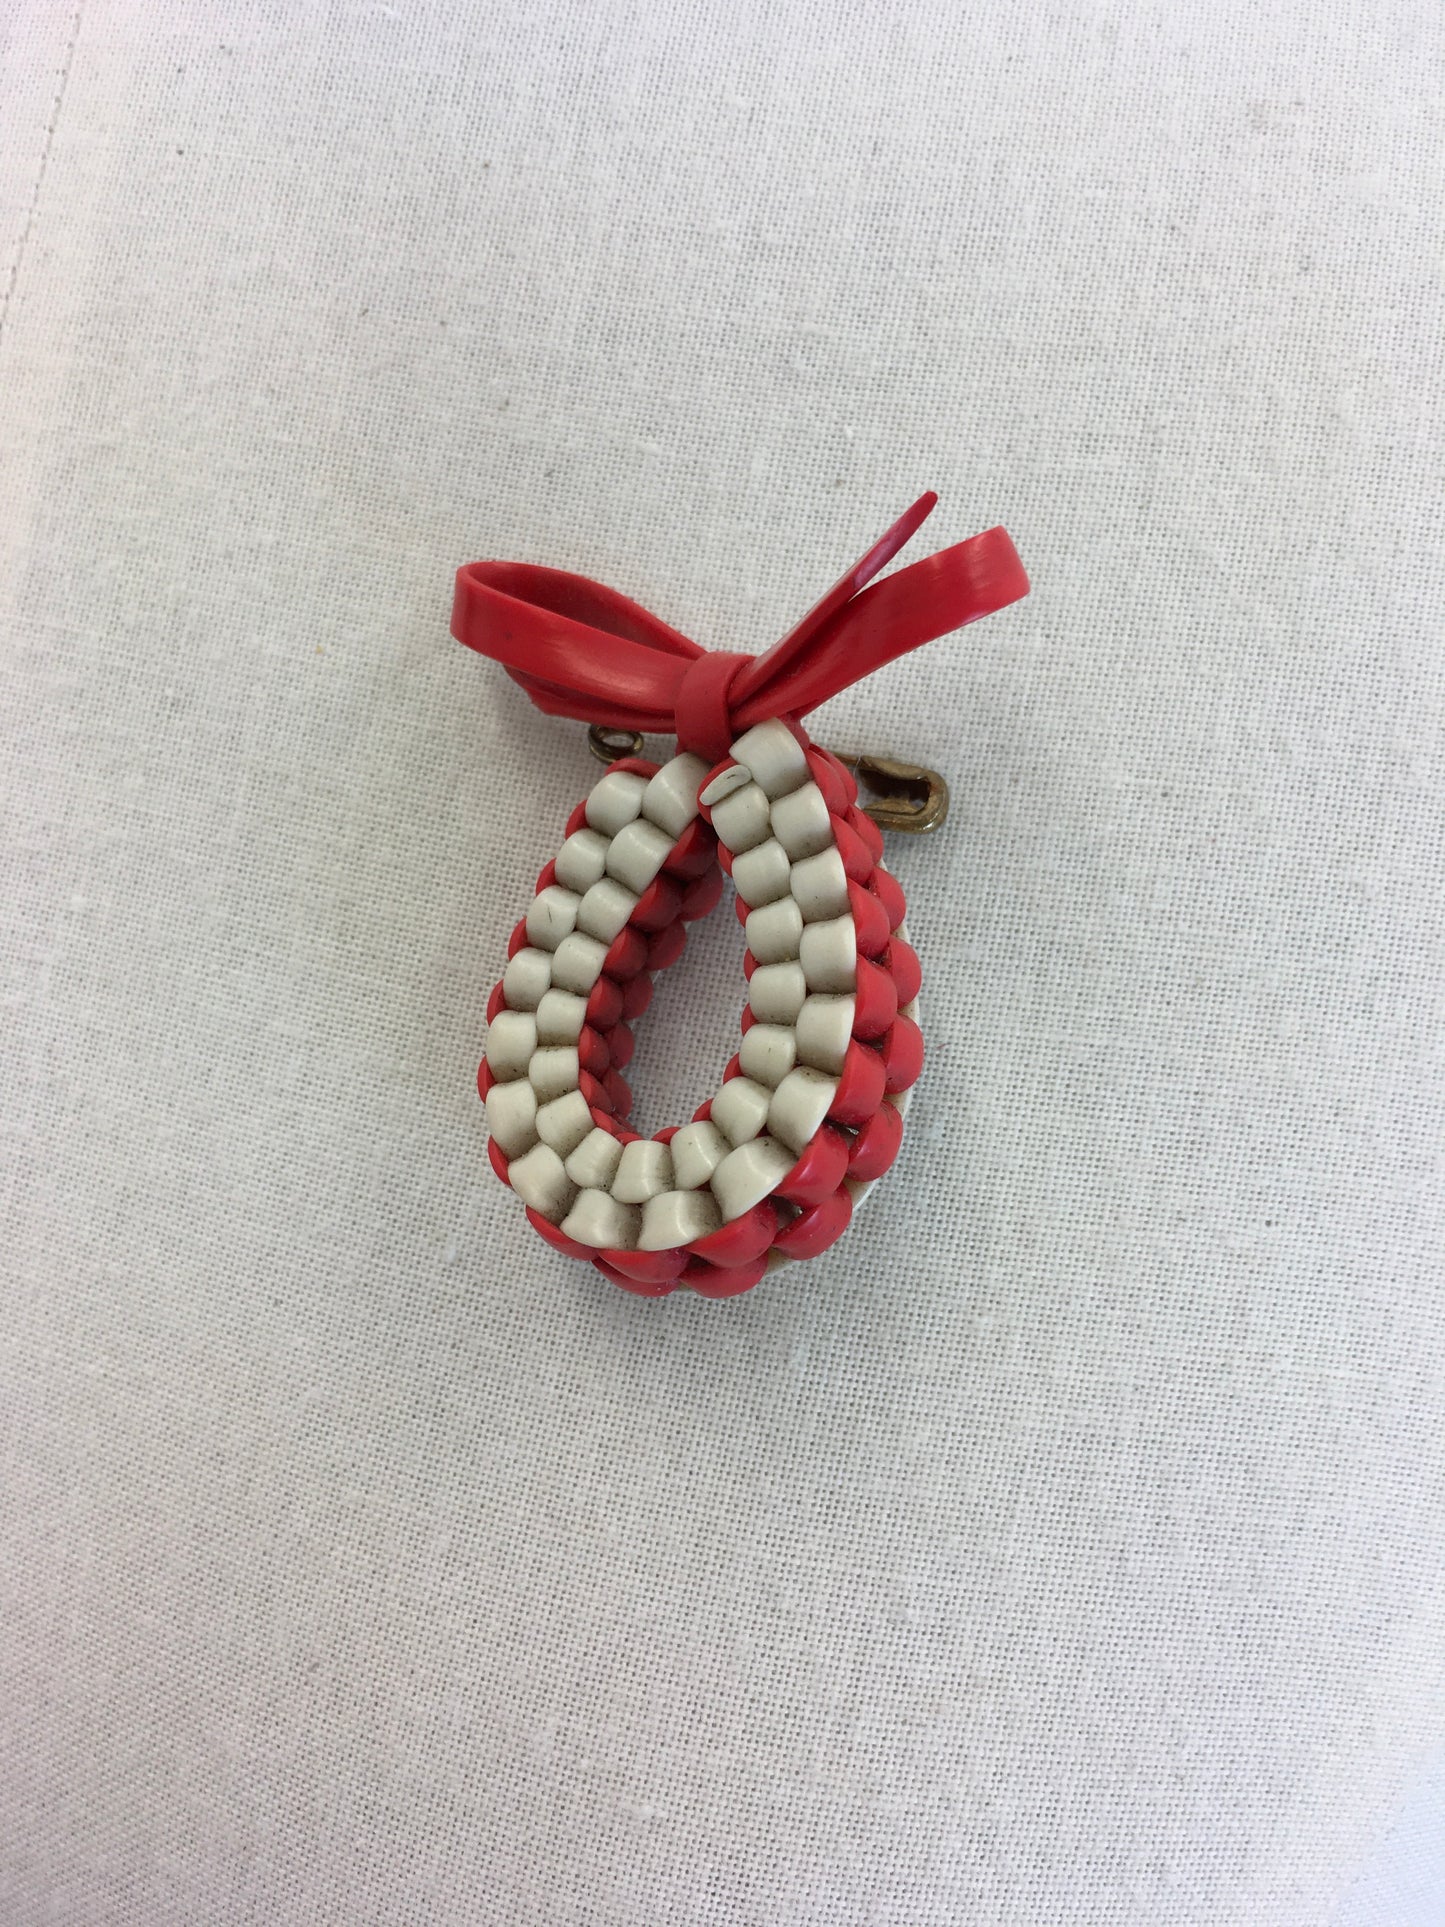 Original 1940’s Make Do and Mend Telephone Cord Brooch - In Red and White